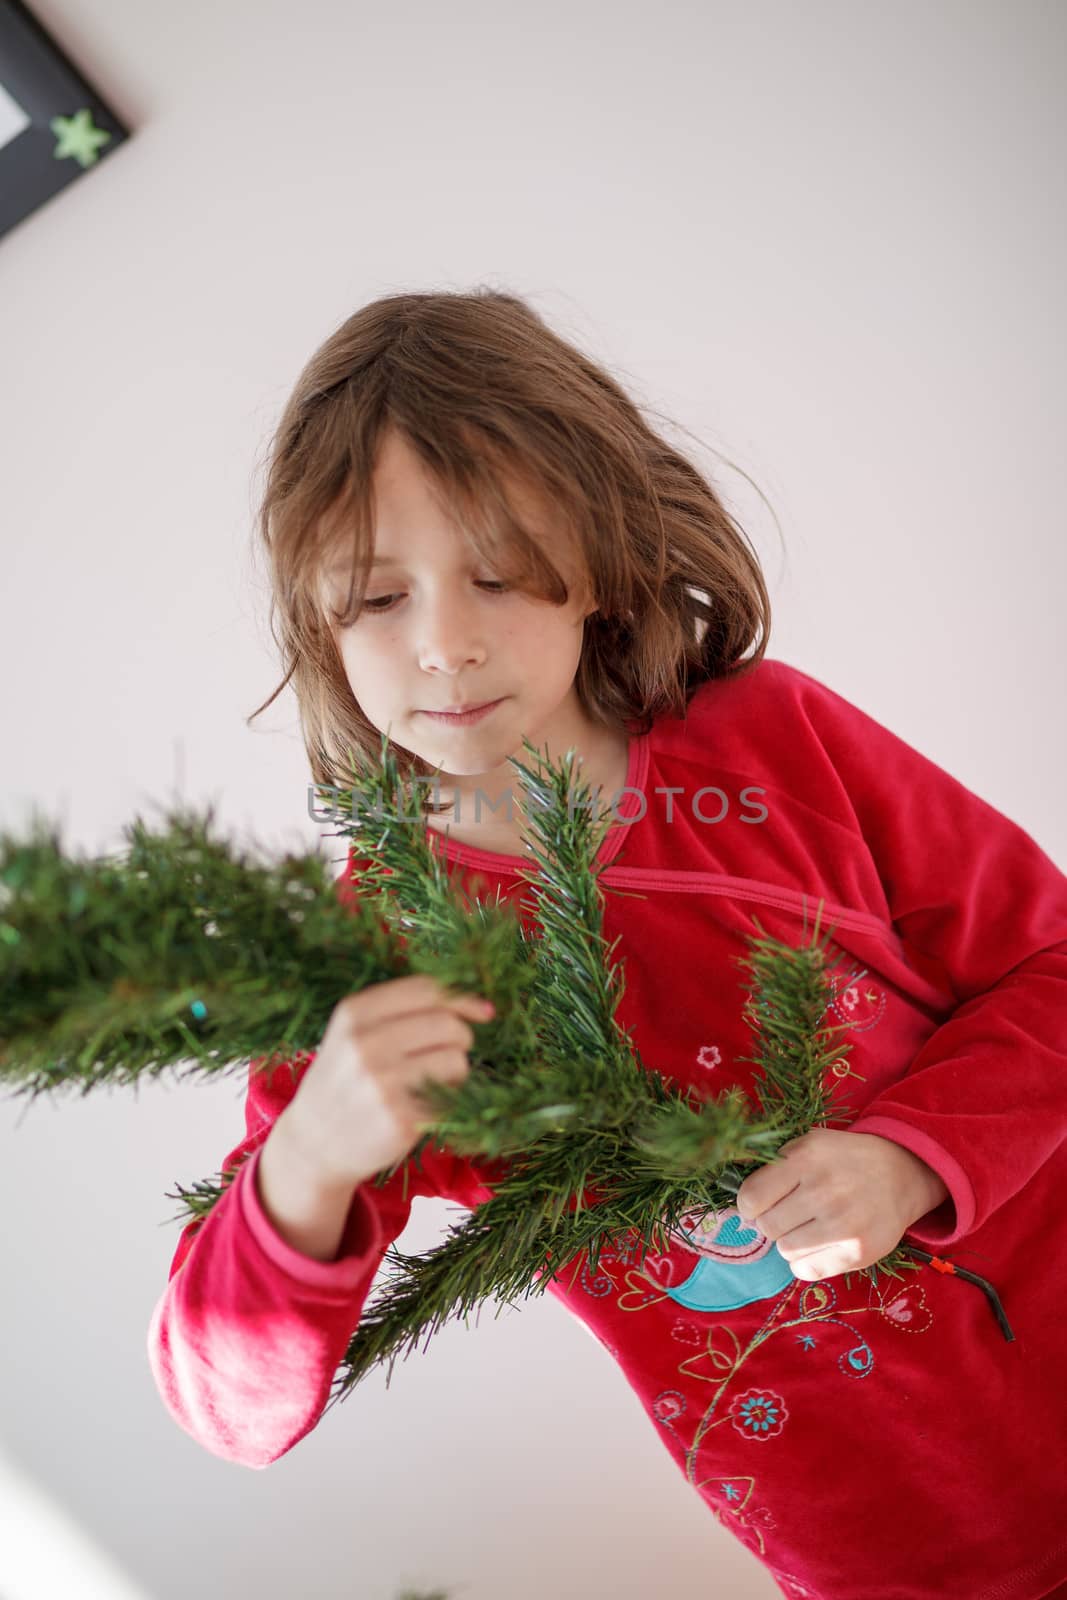 Girl decorating a Christmas tree by Talanis